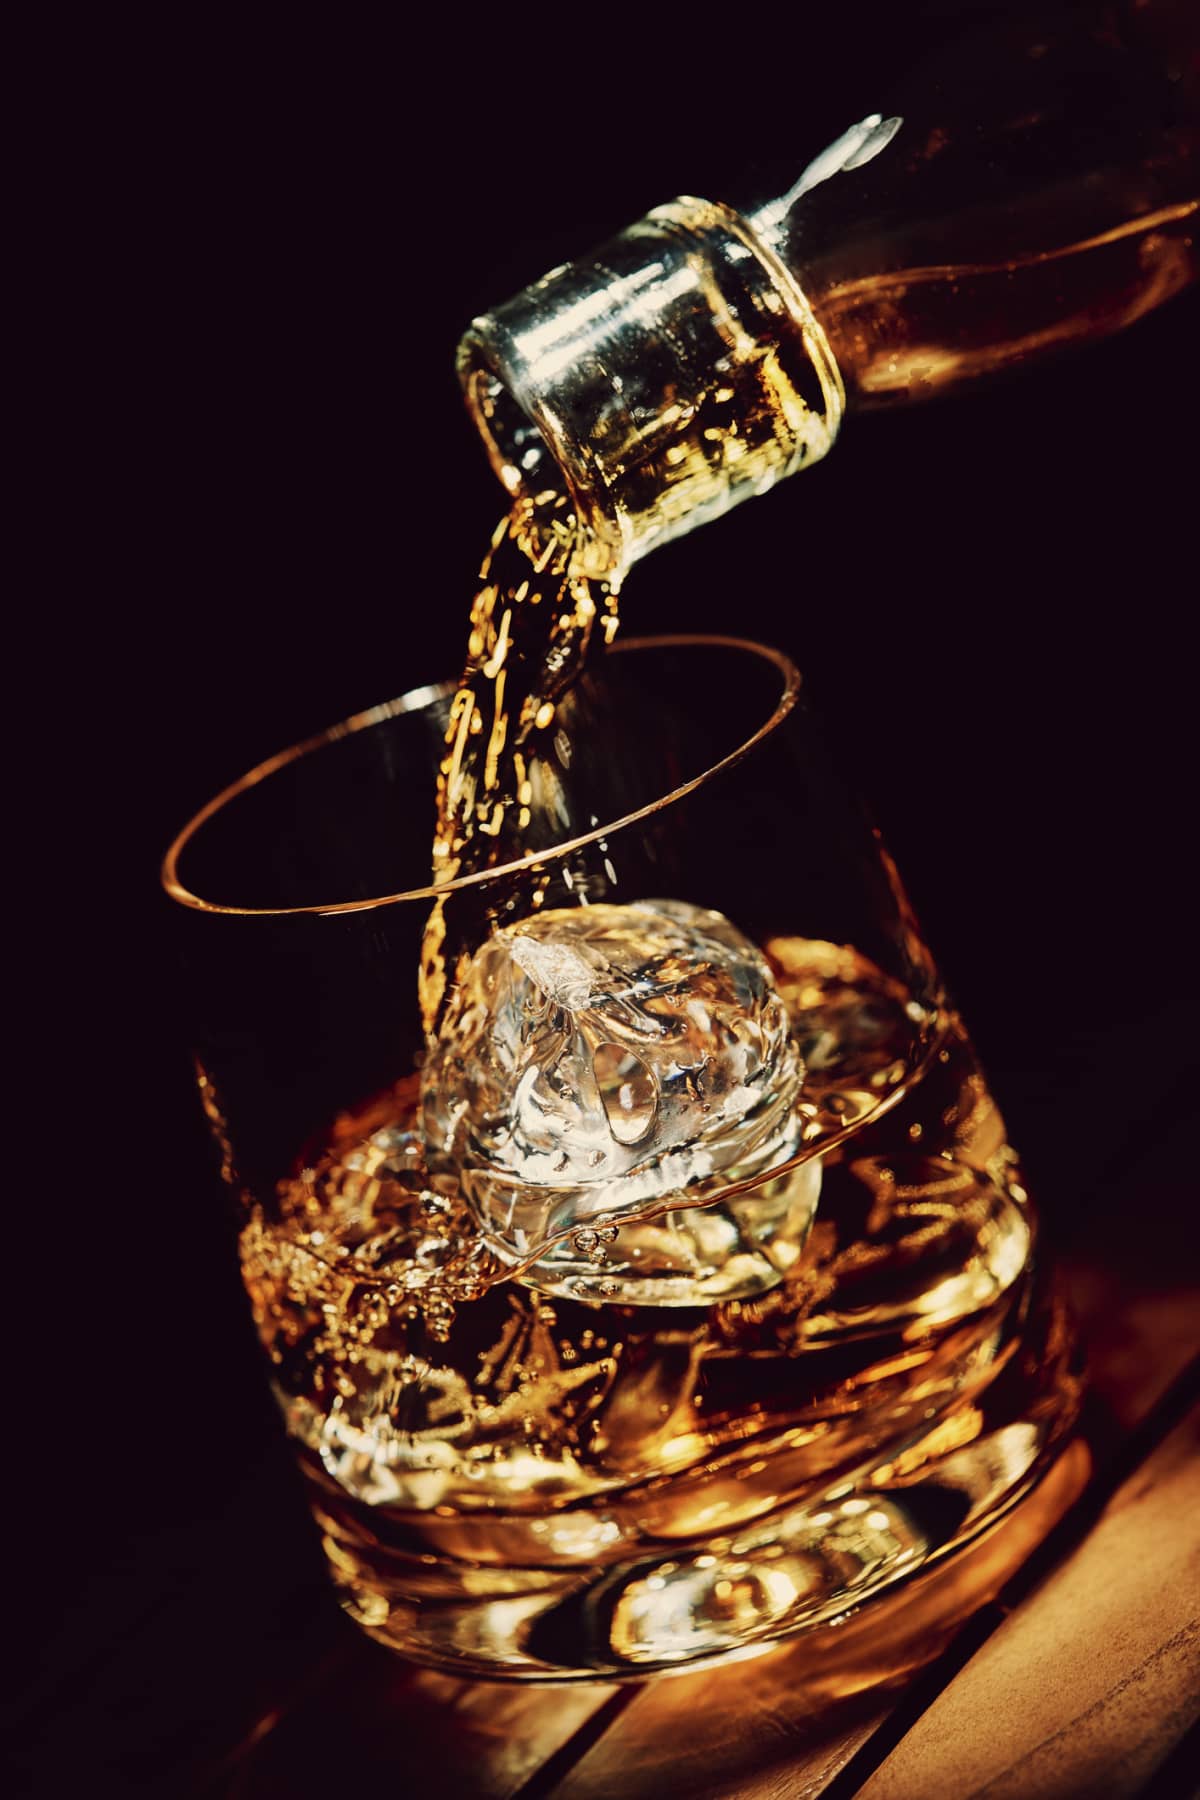 Whiskey pouring into a glass of whisky with ice, in a dark background.